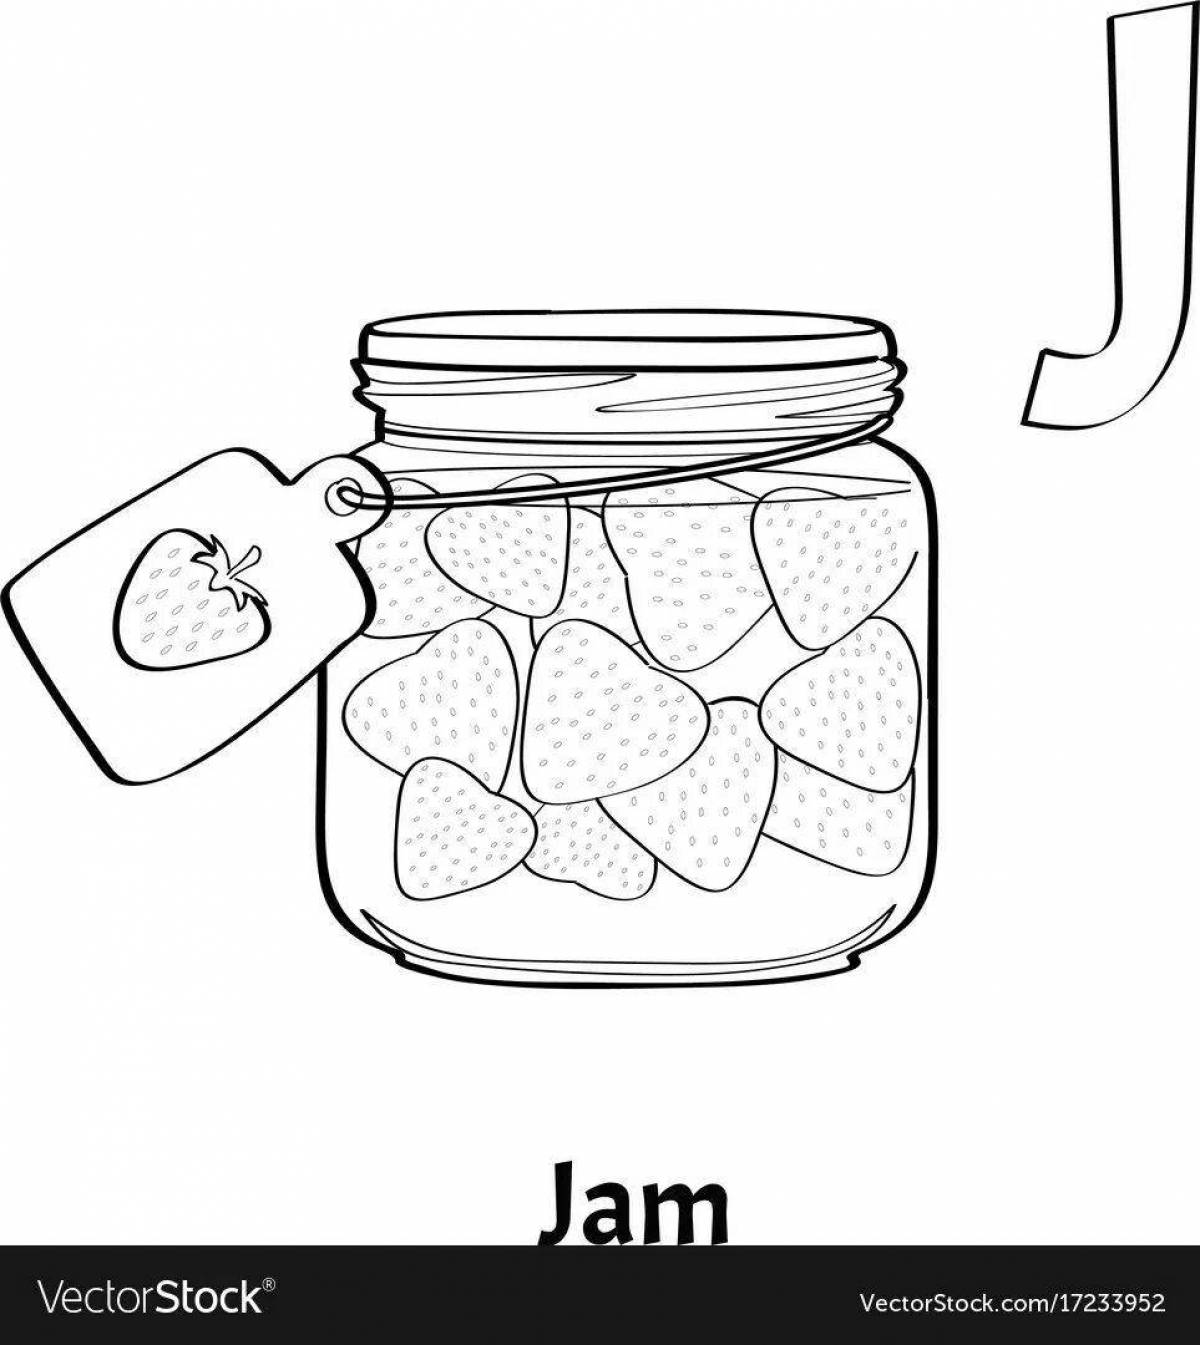 Sweet jam coloring book for kids